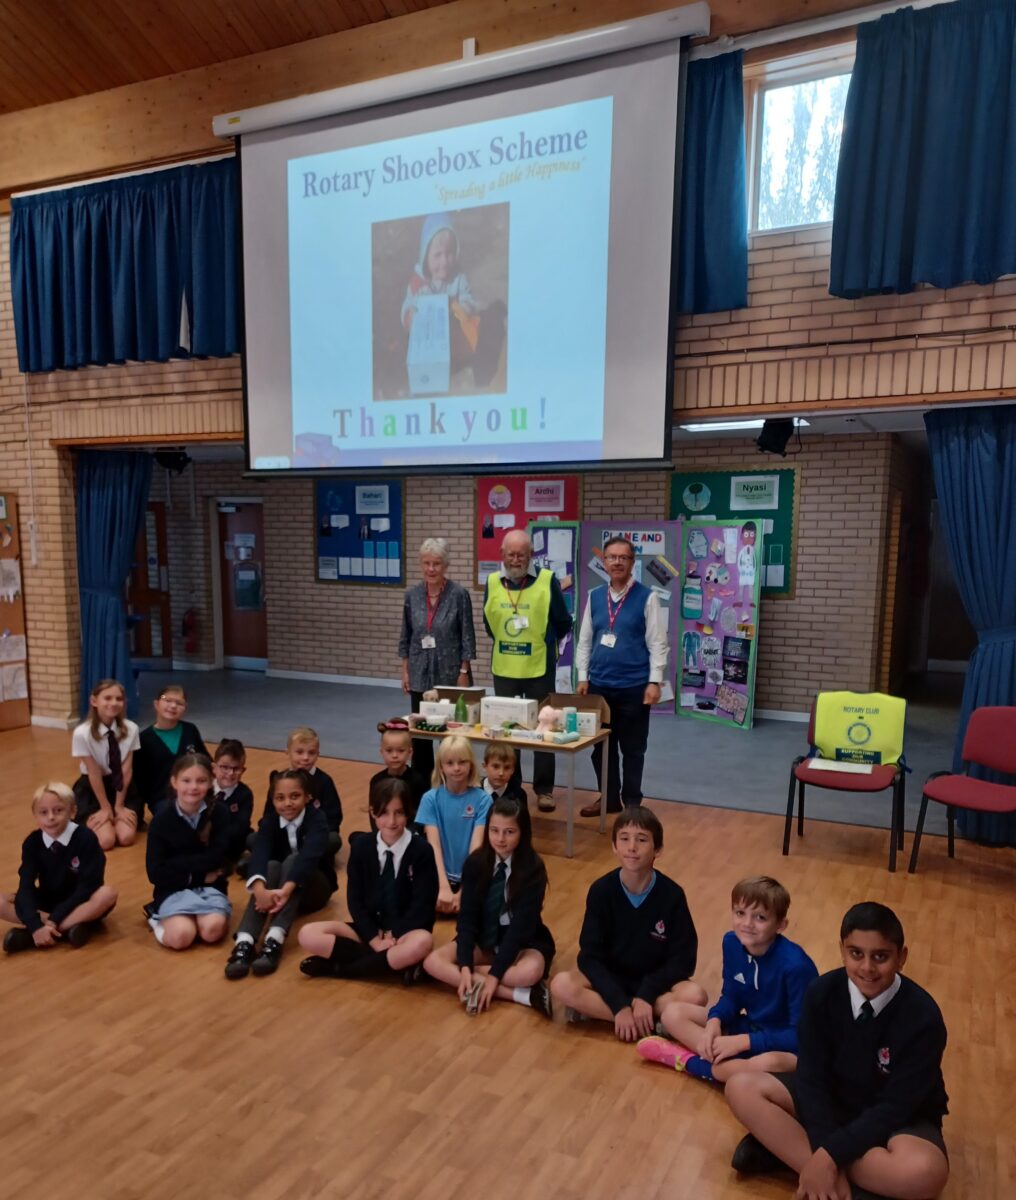 The School Council invited the local Rotary Shoe Box Appeal team to our KS2 Assembly today. The children are pictured sat in the hall alongside the Rotary Shoebox Scheme staff.